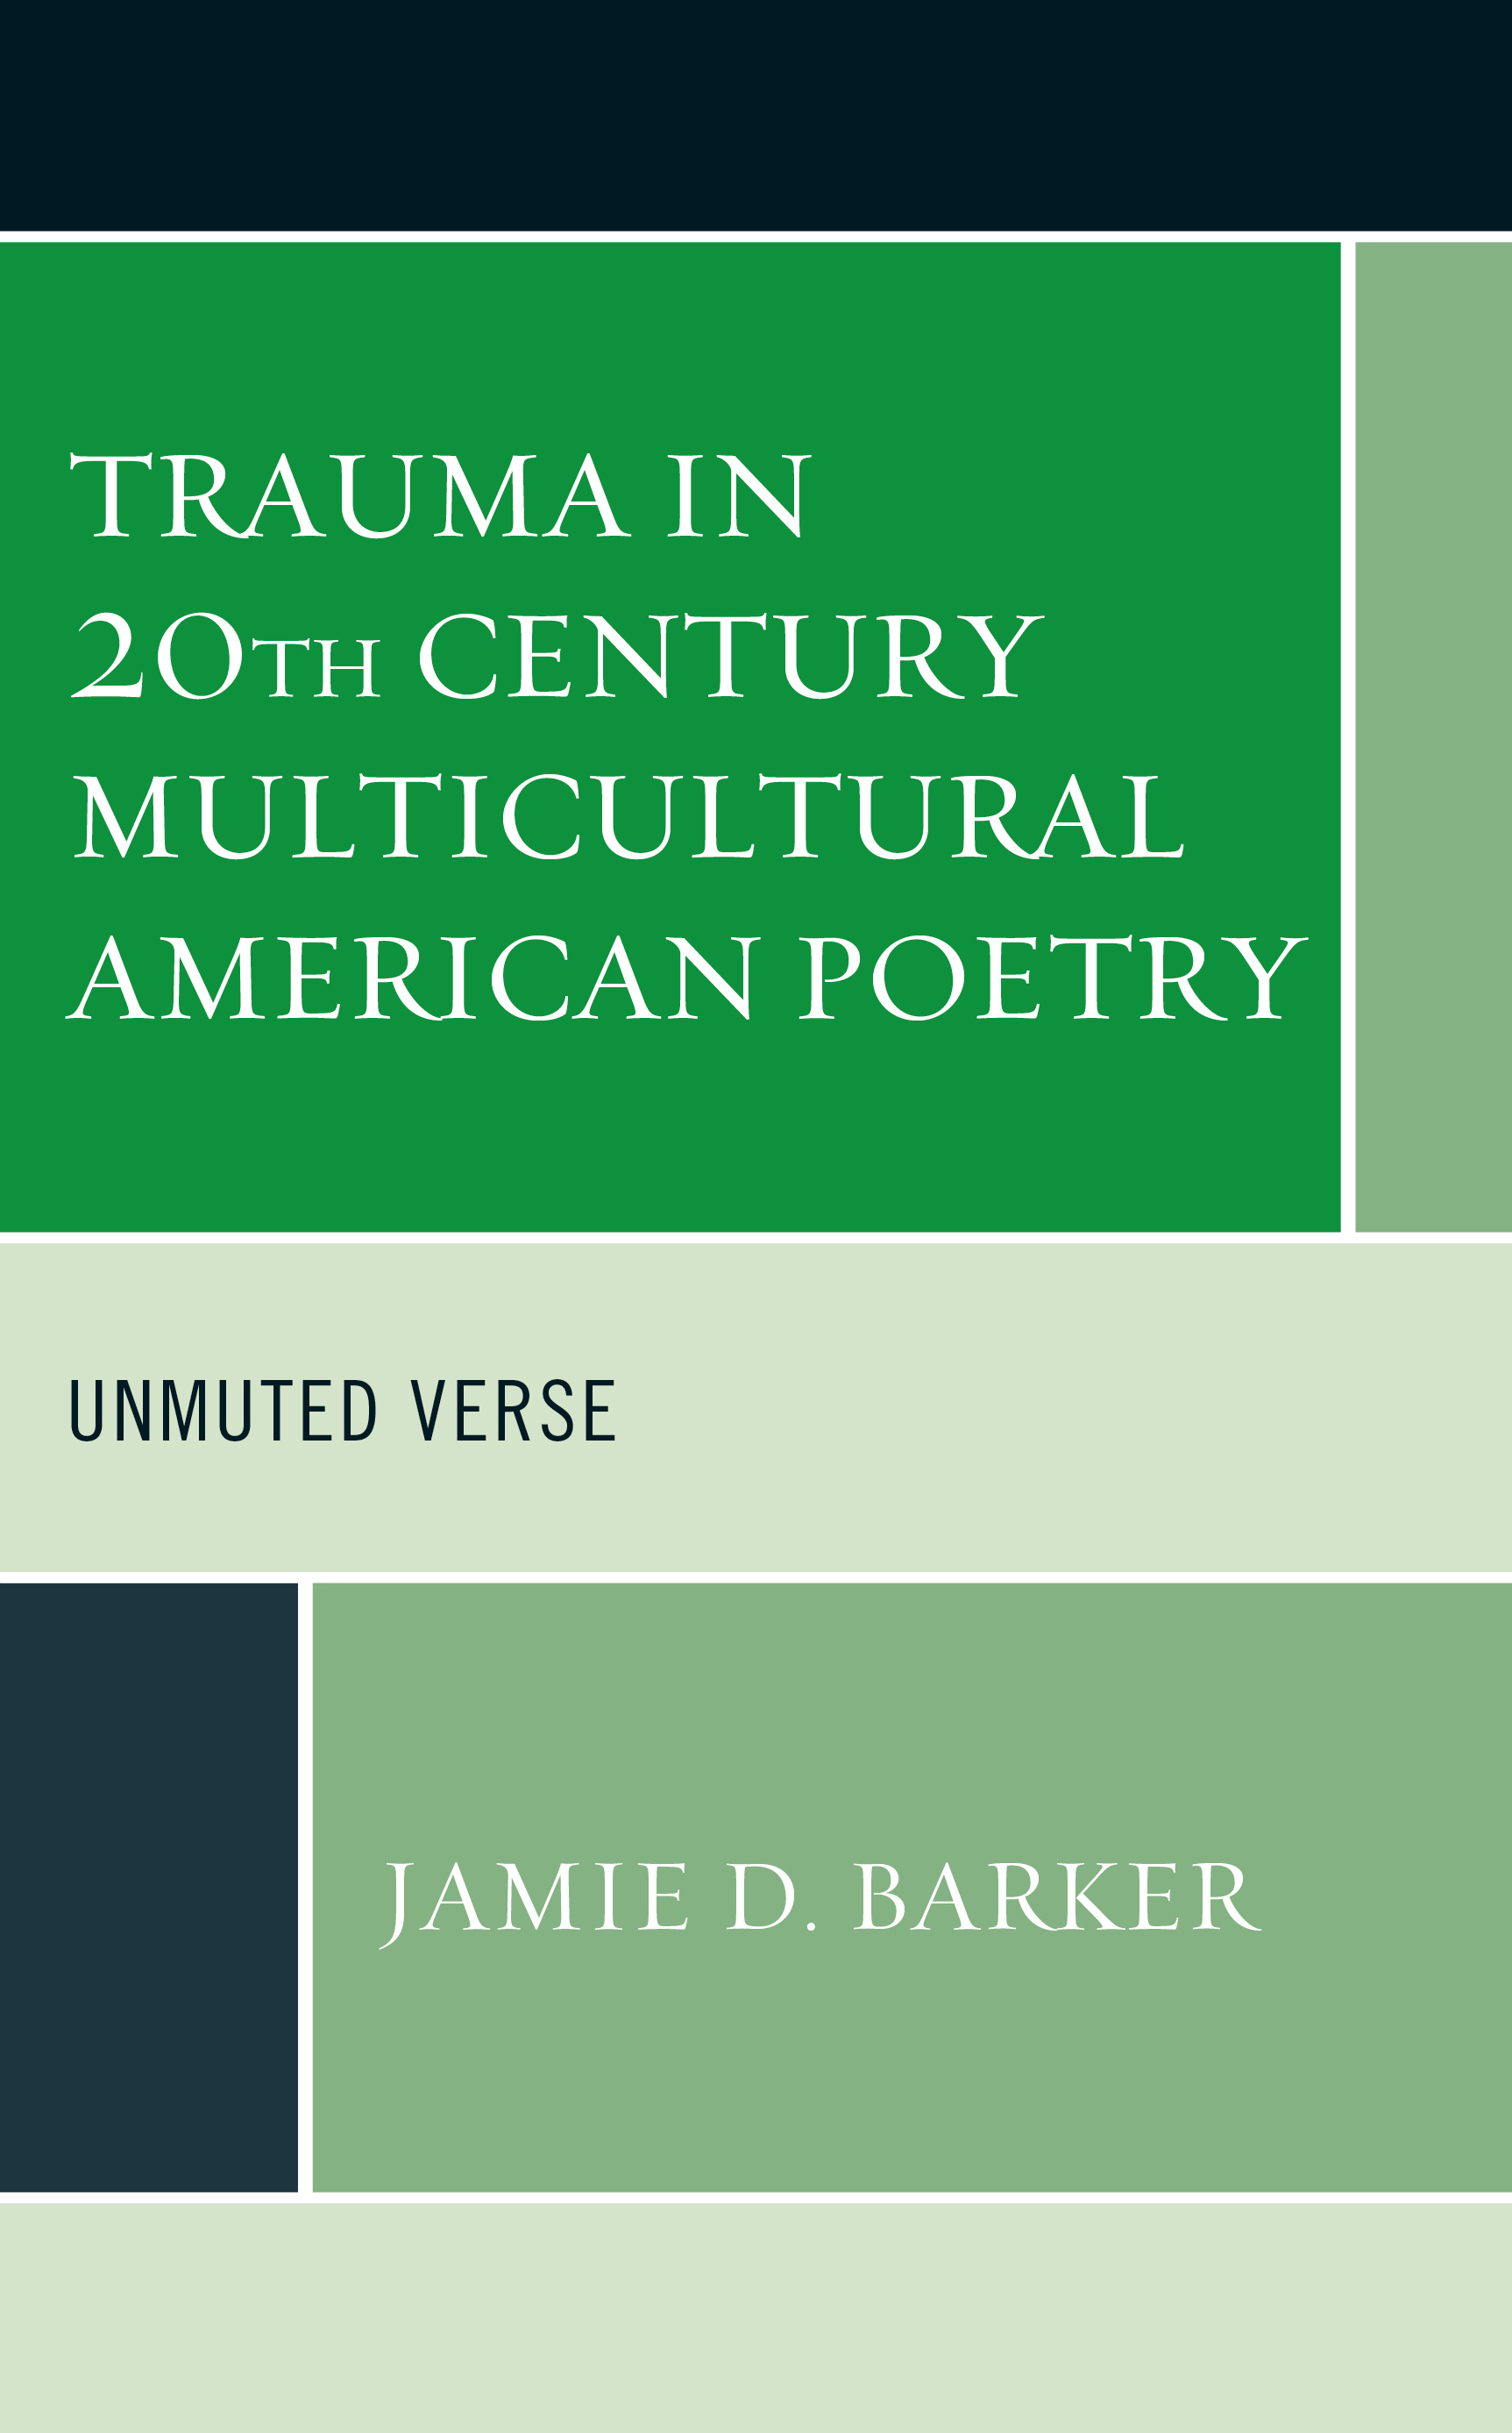 Trauma in 20th Century Multicultural American Poetry: Unmuted Verse